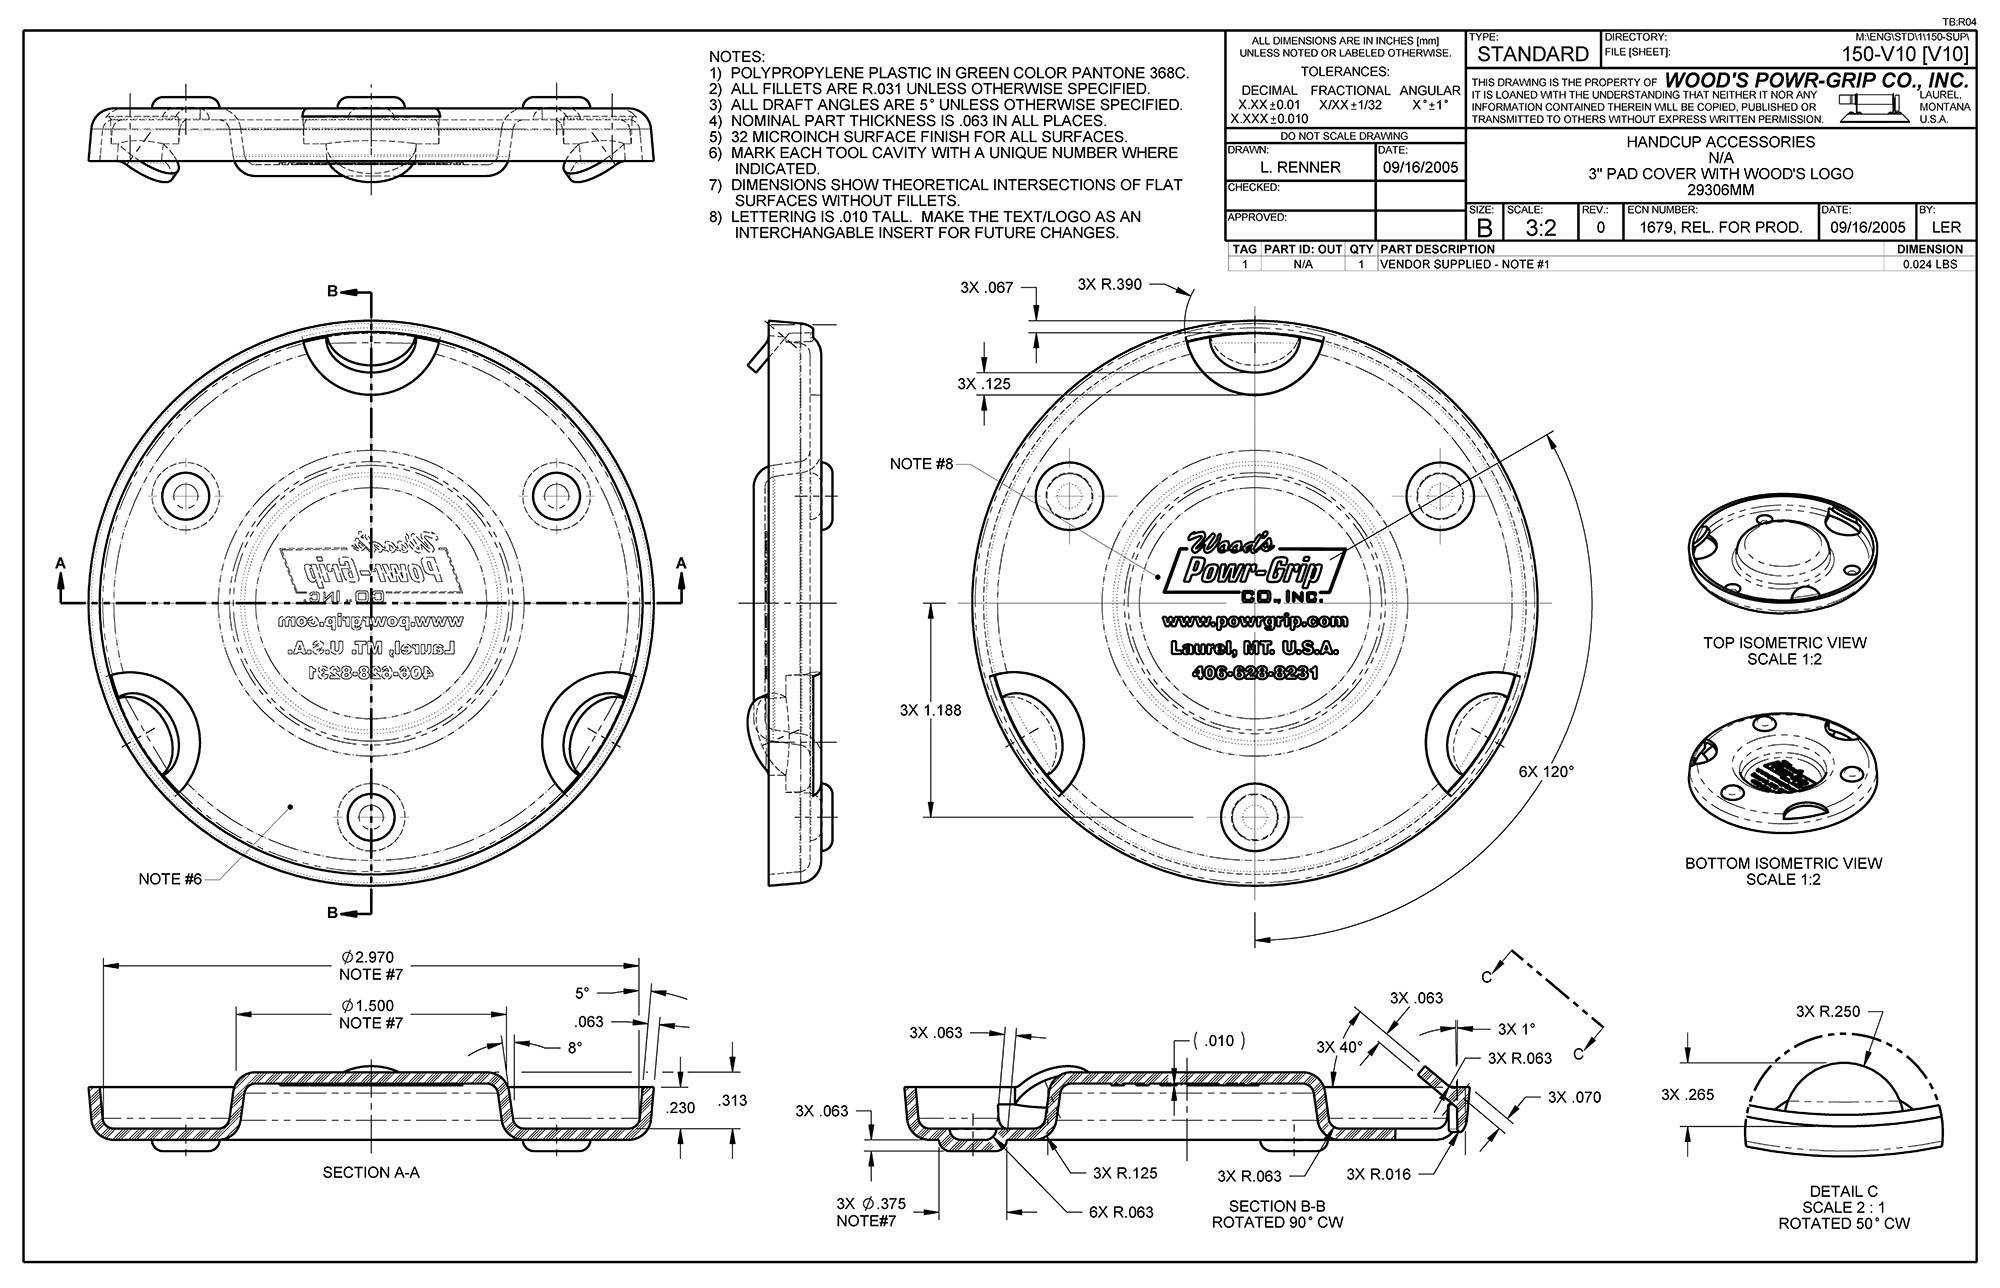 Figure shows the drawing of a molded plastic part.